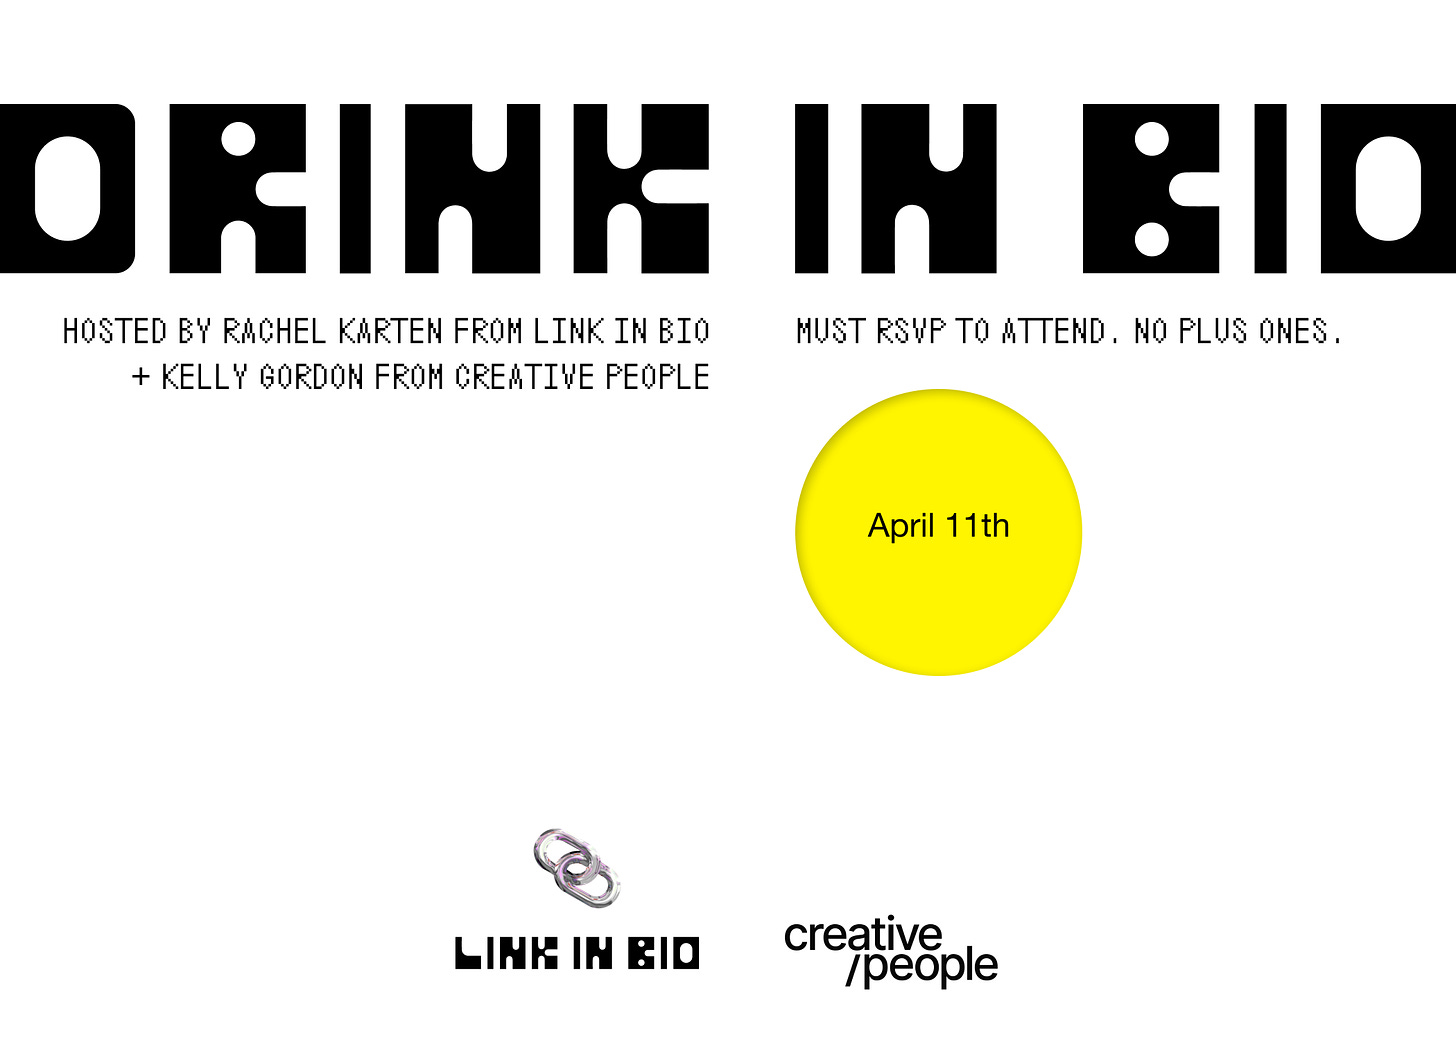 Invite that says "Drink in Bio" Hosted by Rachel Karten and Kelly Gordon on April 11th.